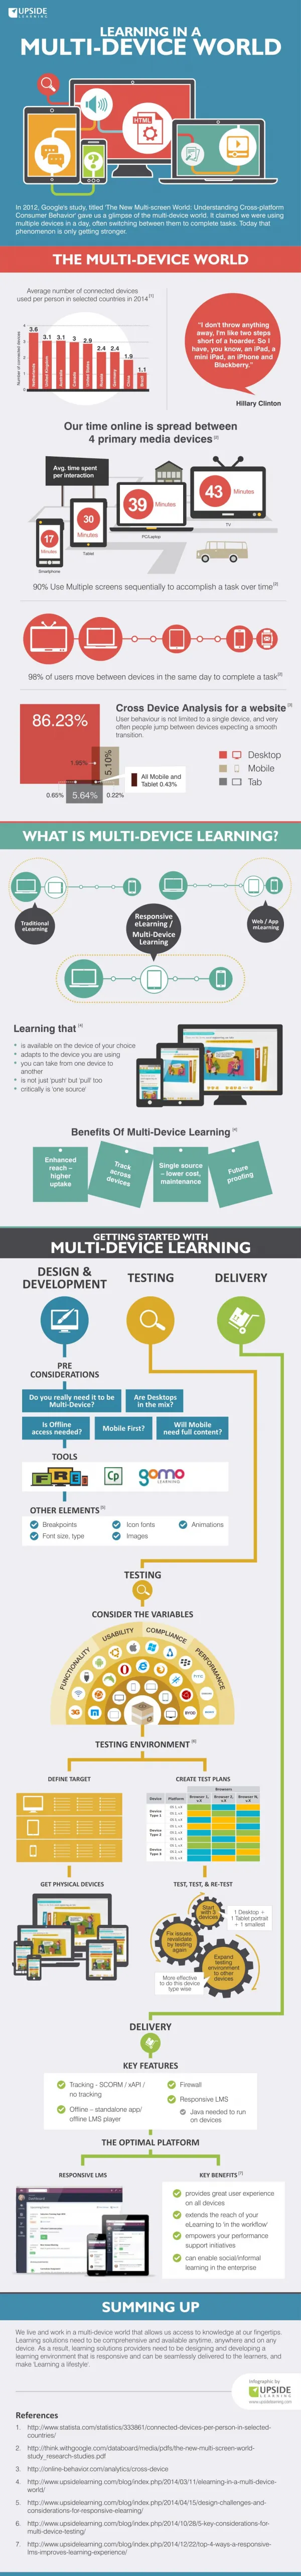 Learning in a Multi-device World